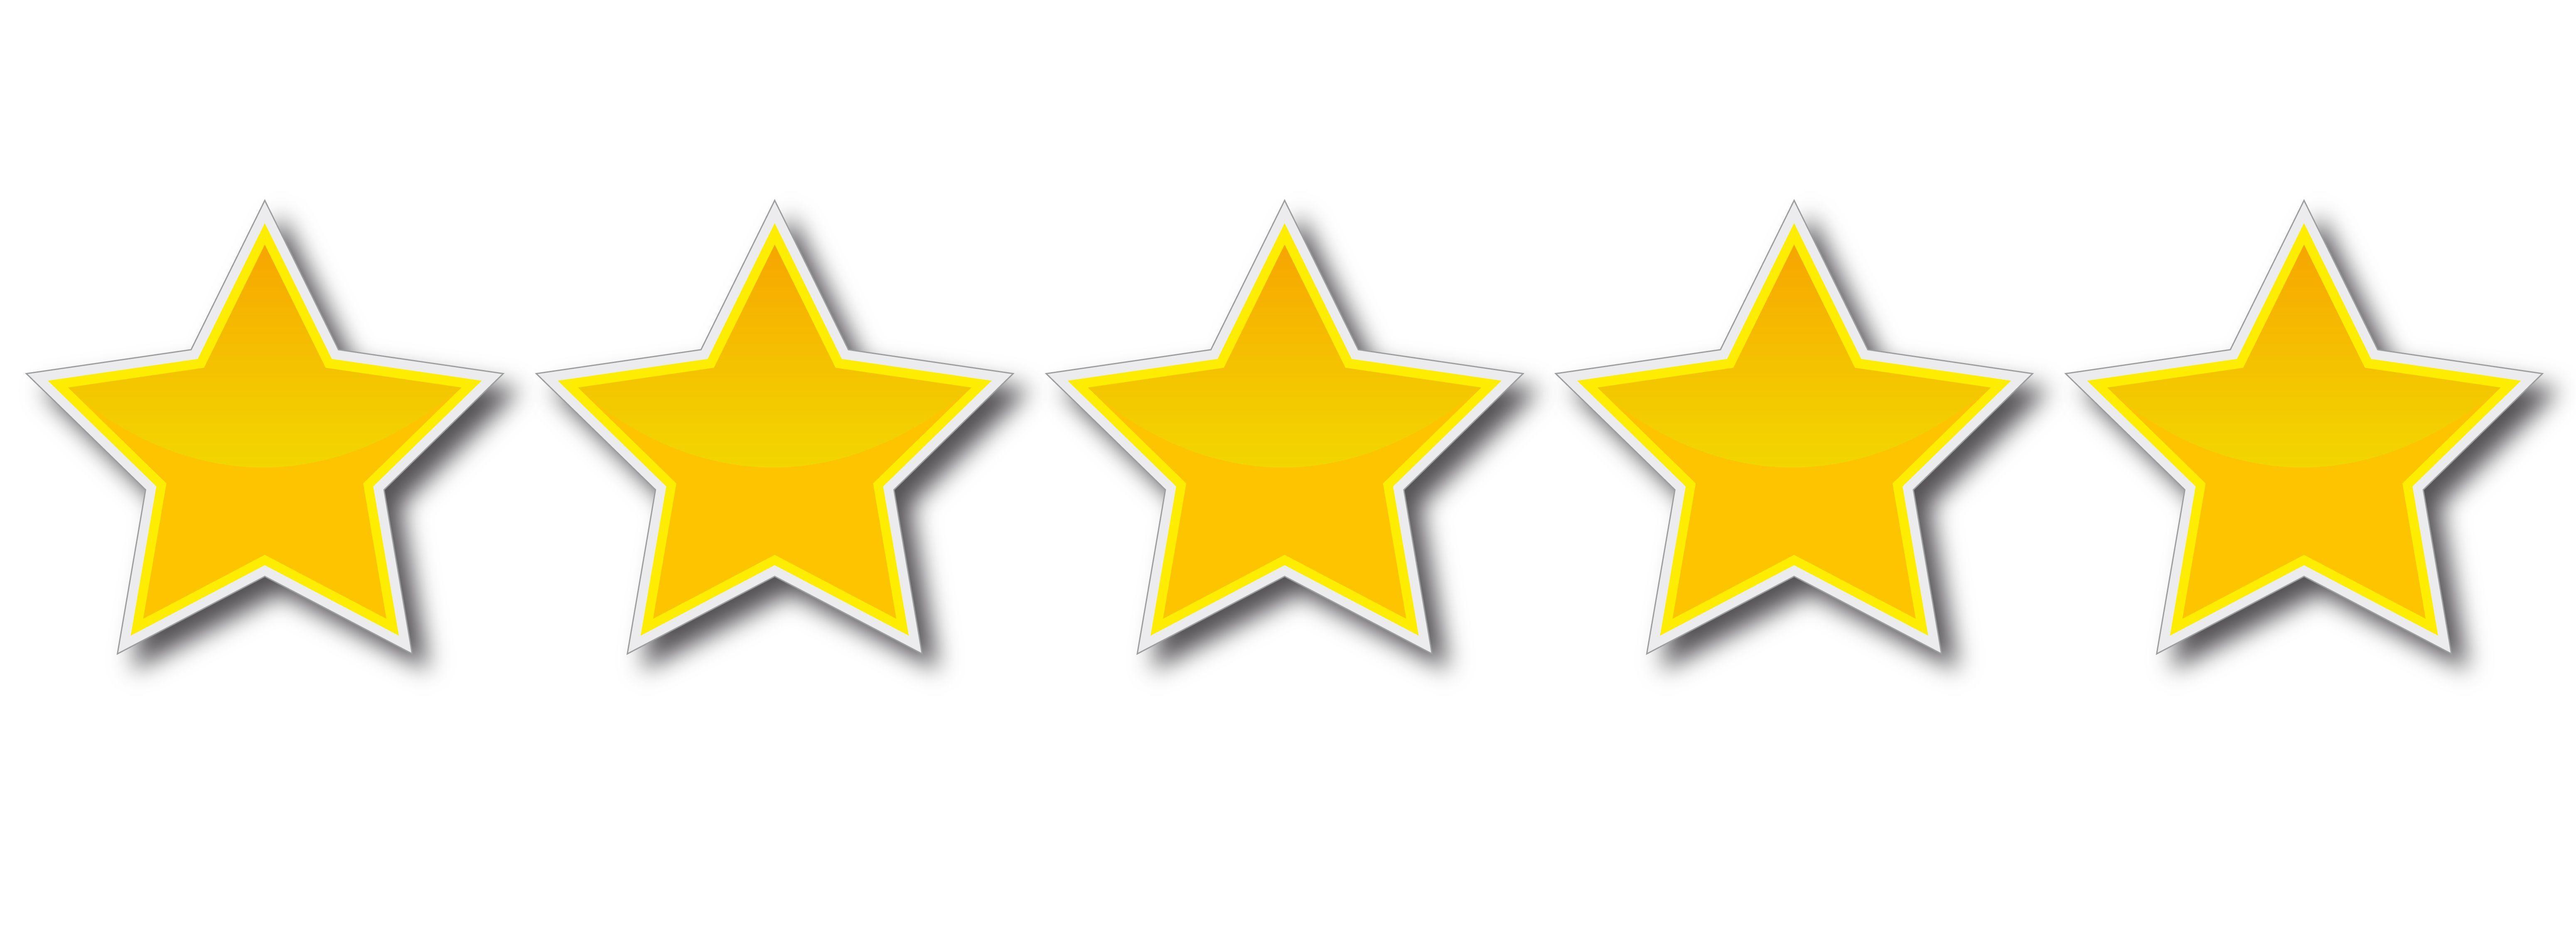 Amazon 5 Star Review Logo - STAR Reviews For Write Brain On Amazon.com. Continuing Education